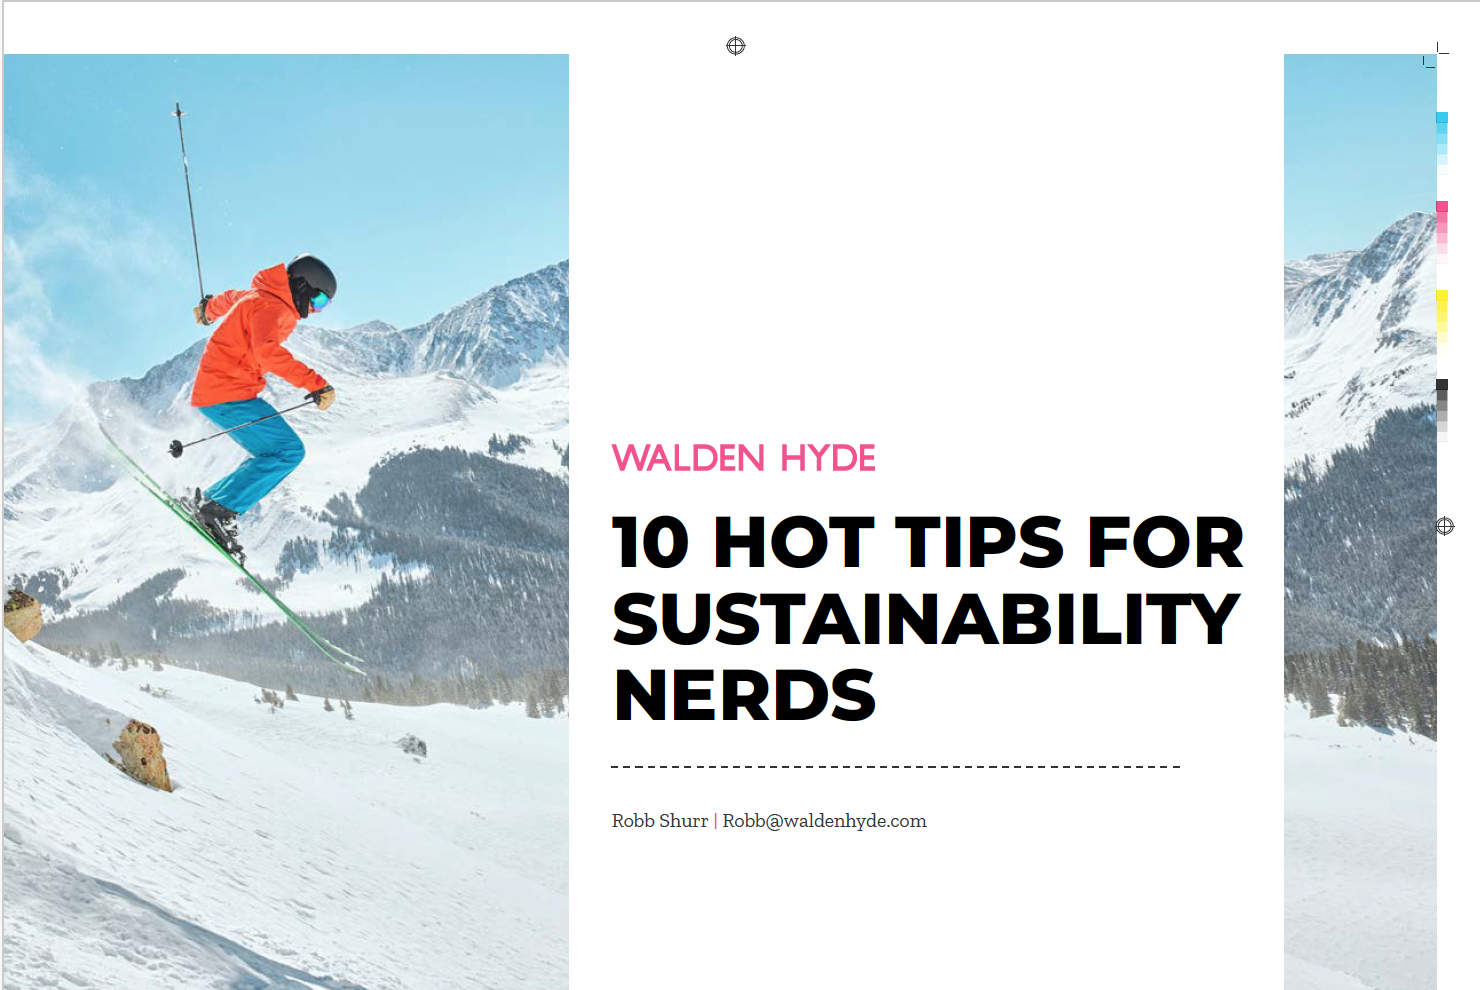 Skier on blue and white with title 10 hot tips for sustainability nerds